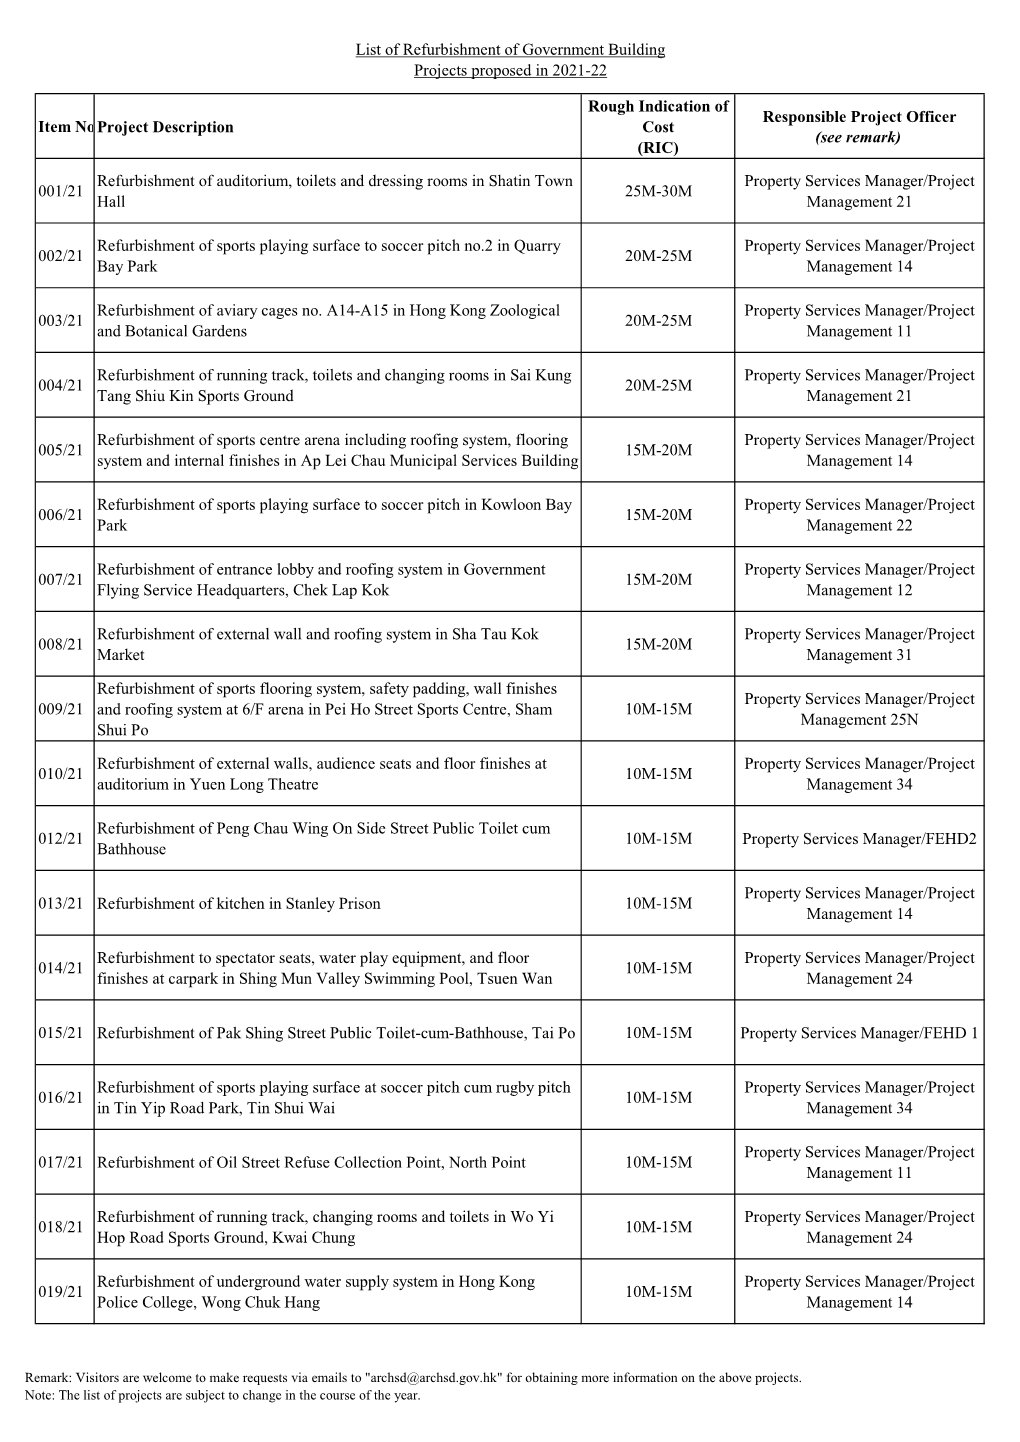 List of Refurbishment of Government Building Projects Proposed in 2021-22